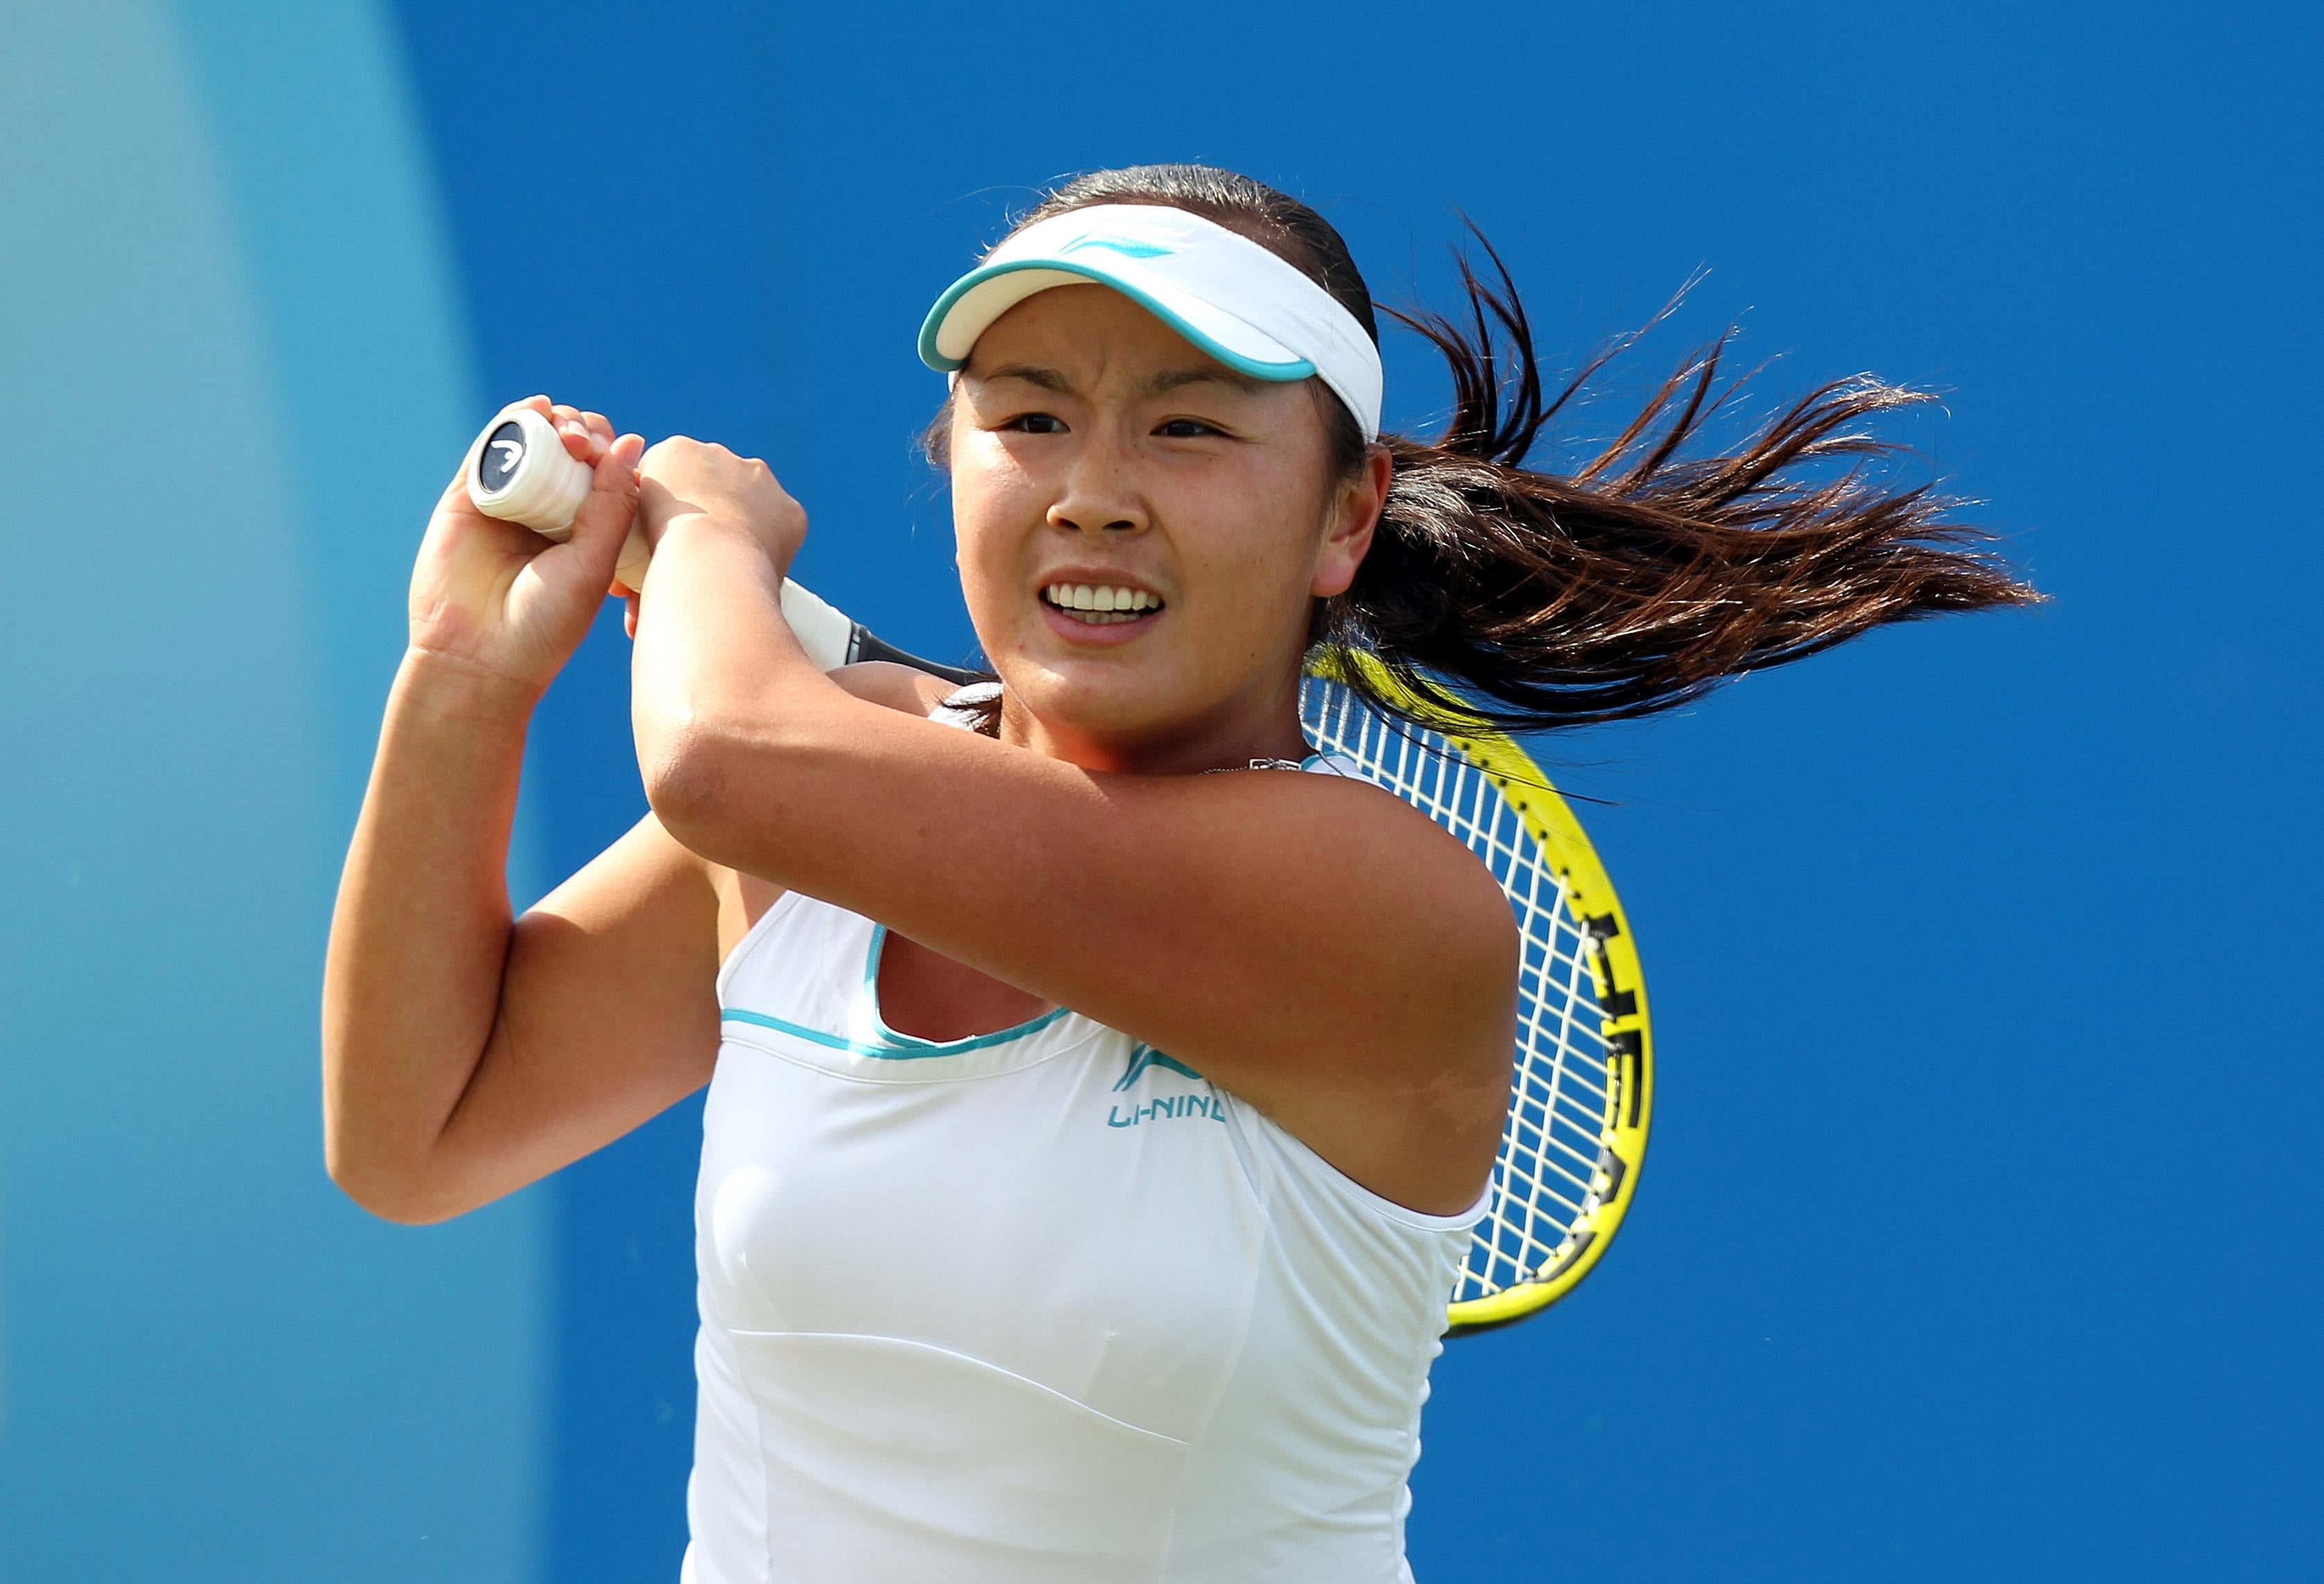 Peng Shuai has denied making accusations of sexual assault